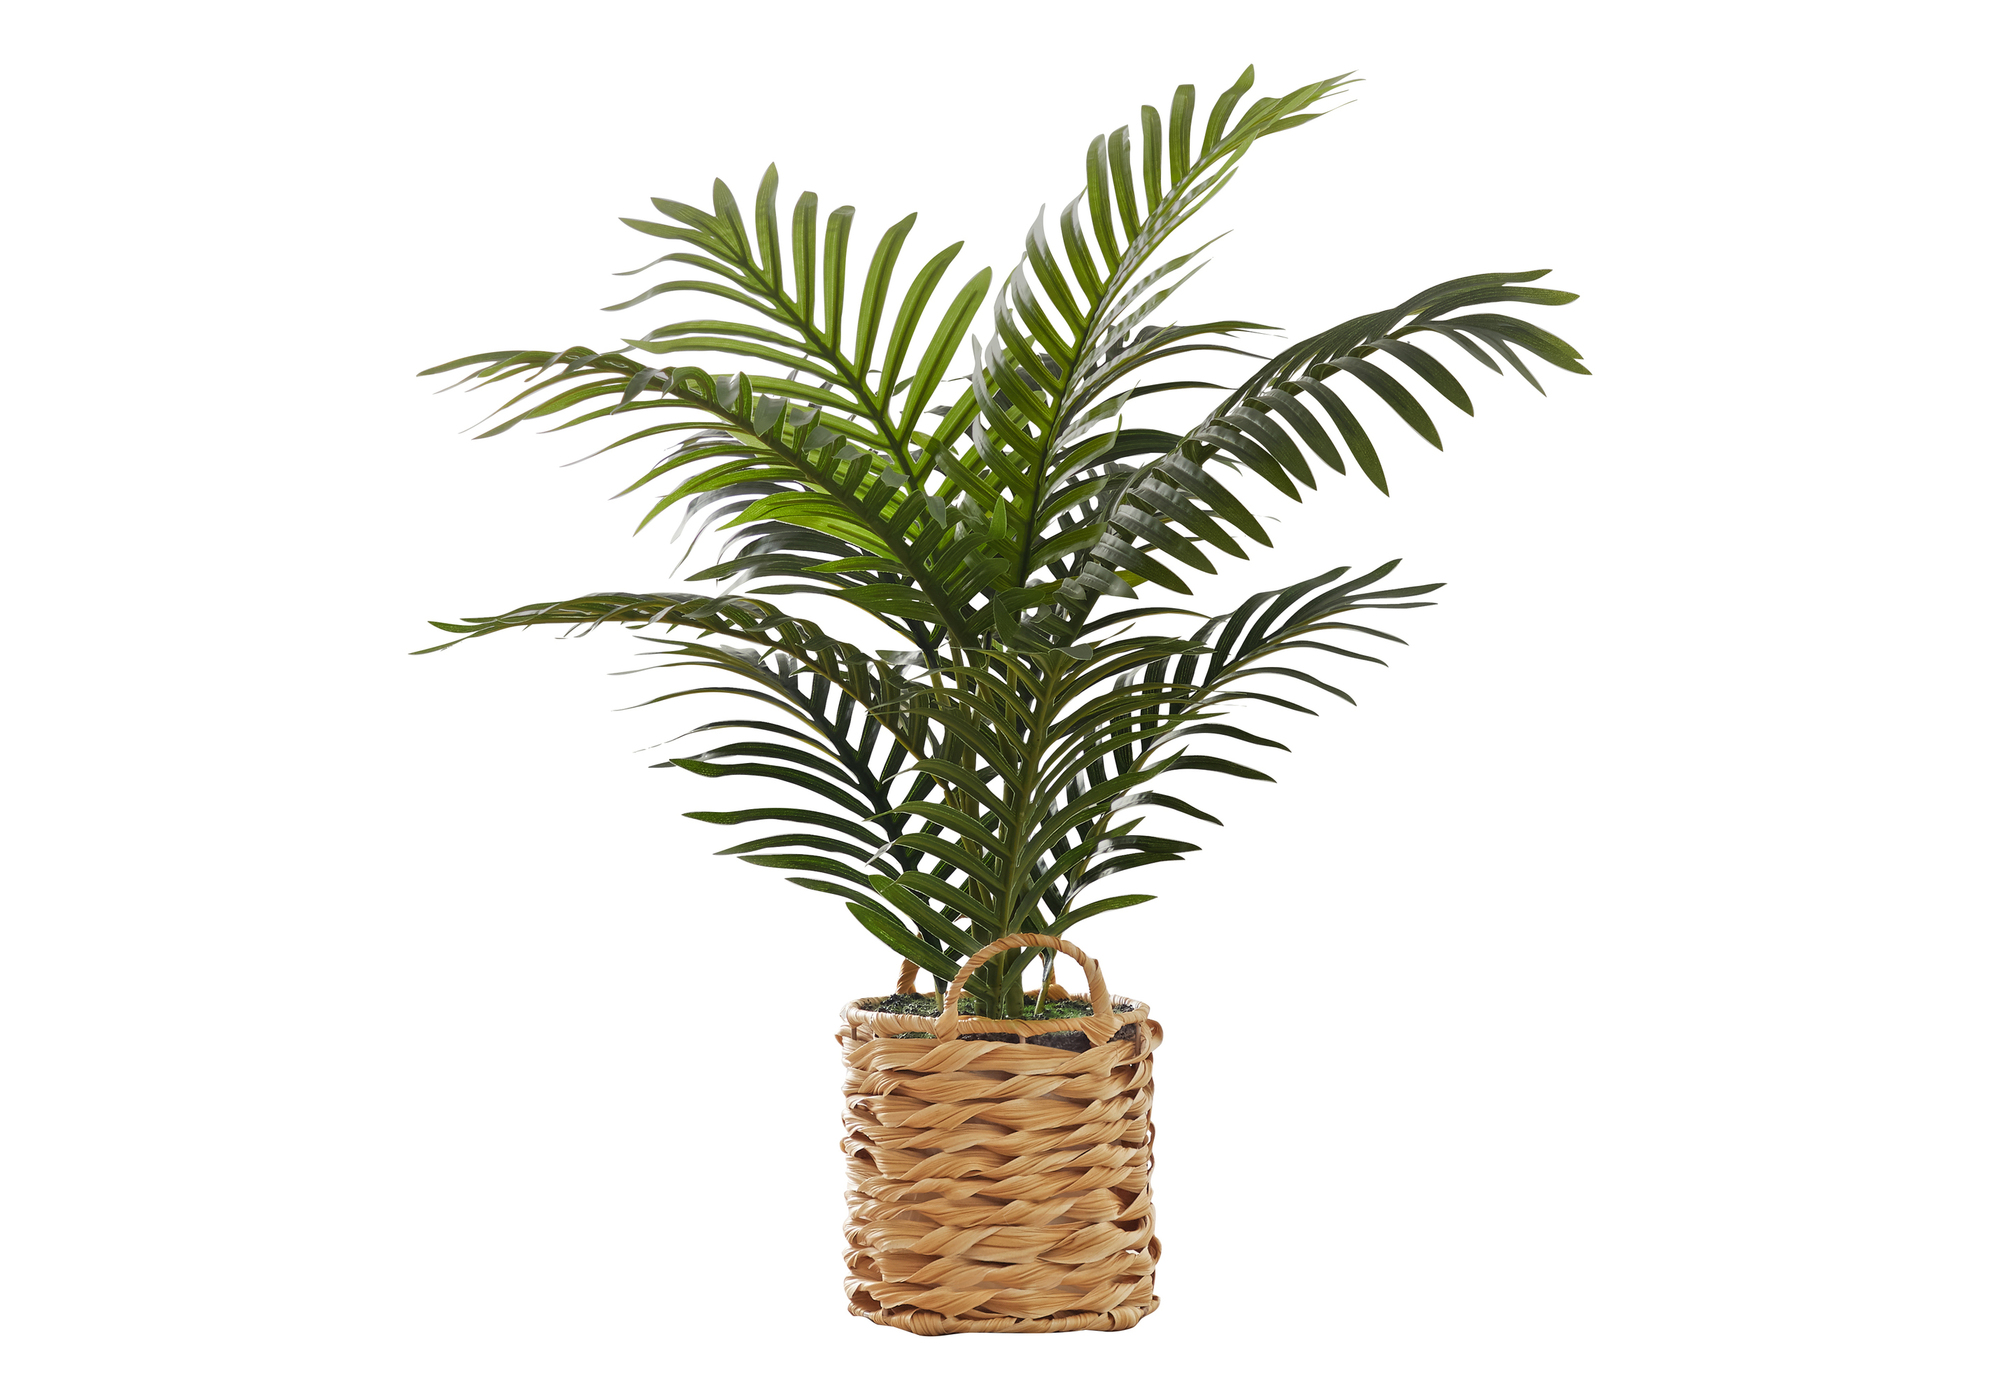 ARTIFICIAL PLANT - 24"H / INDOOR PALM / 8" WOVEN BASKET